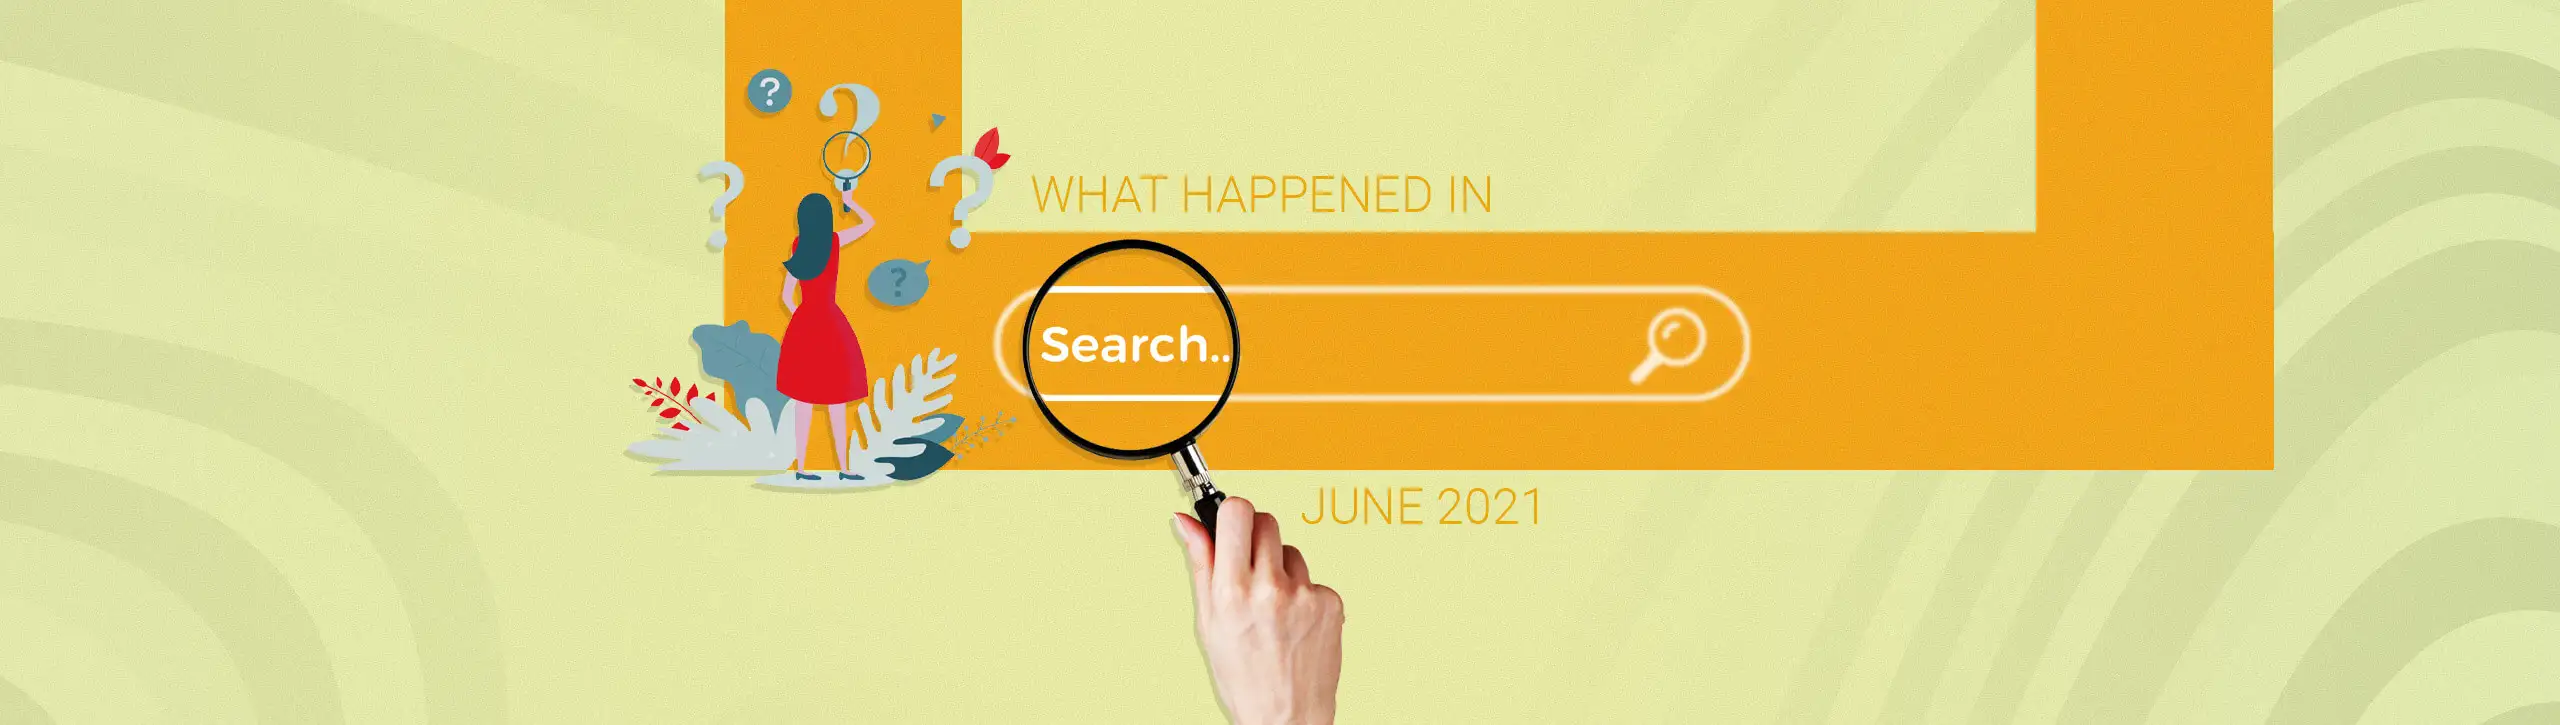 Search Round Up June 2021